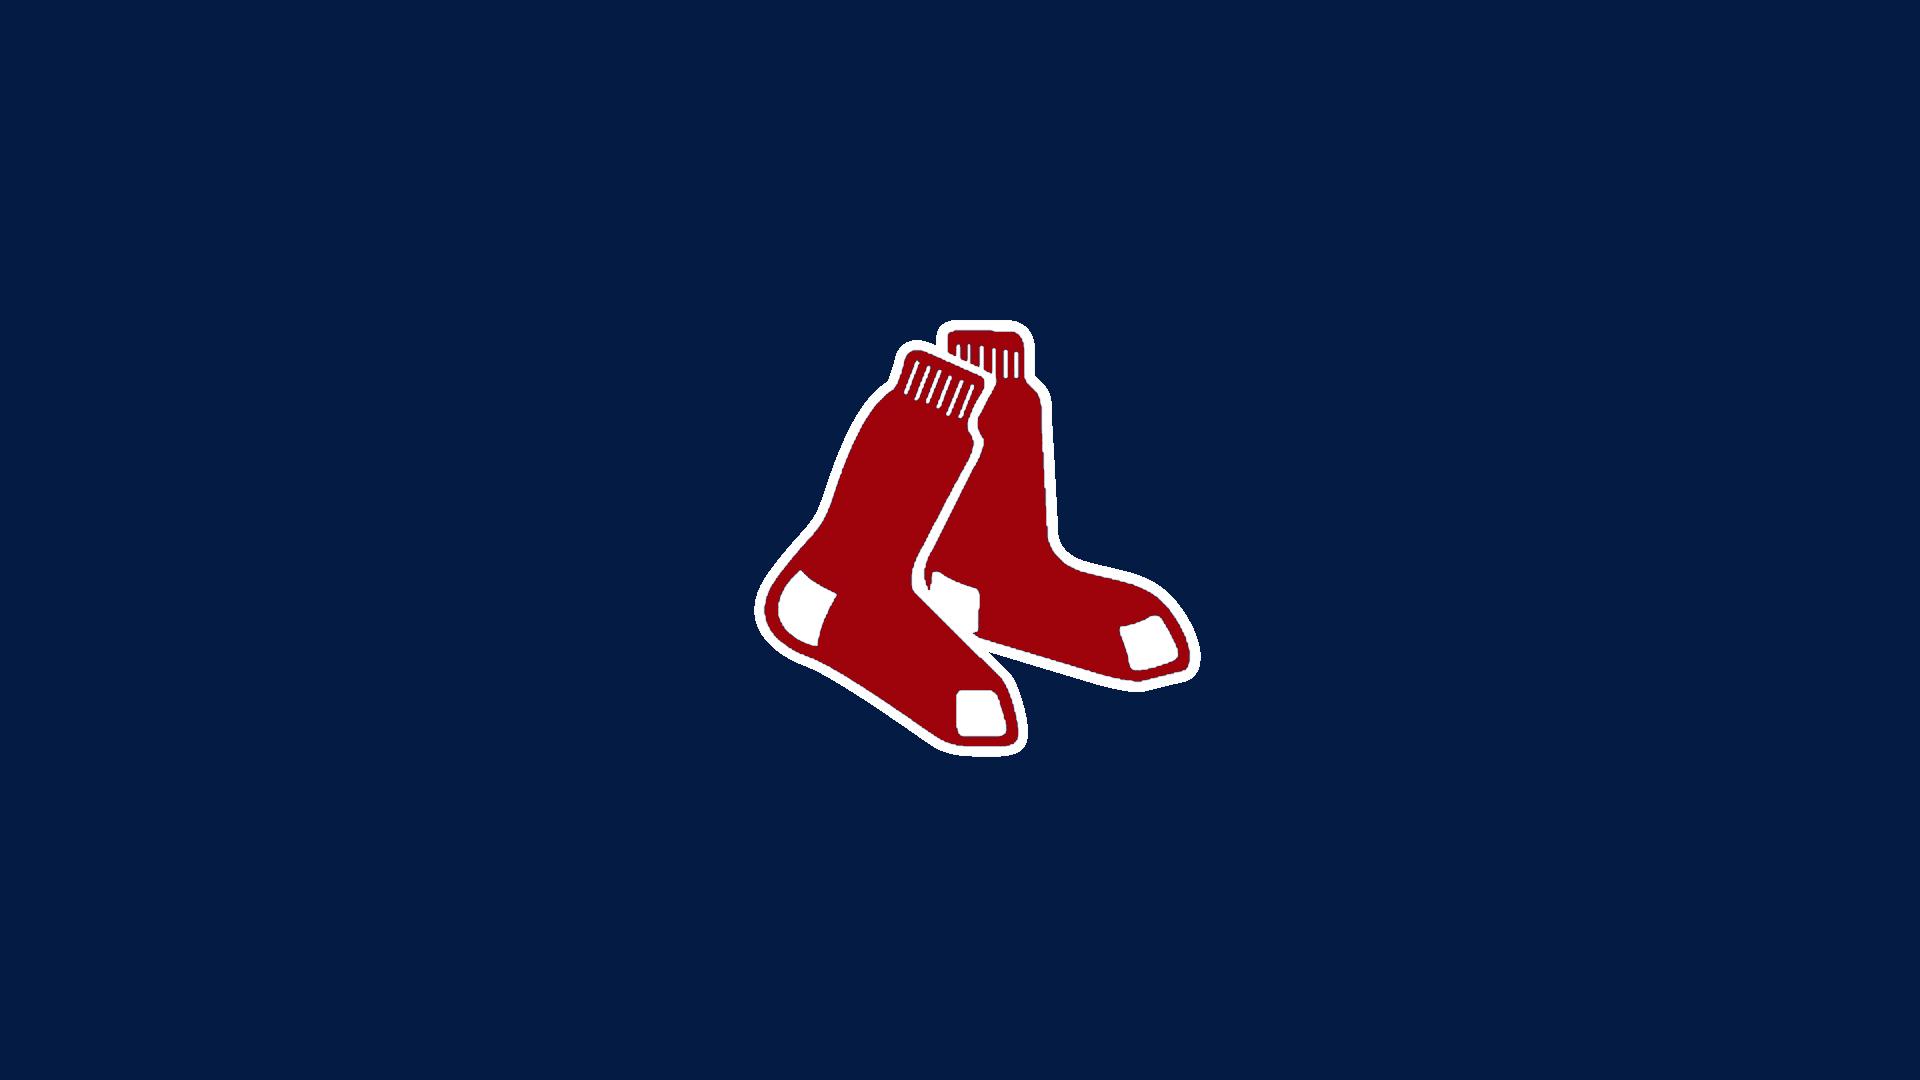 Boston Red Sox Wallpaper. Red